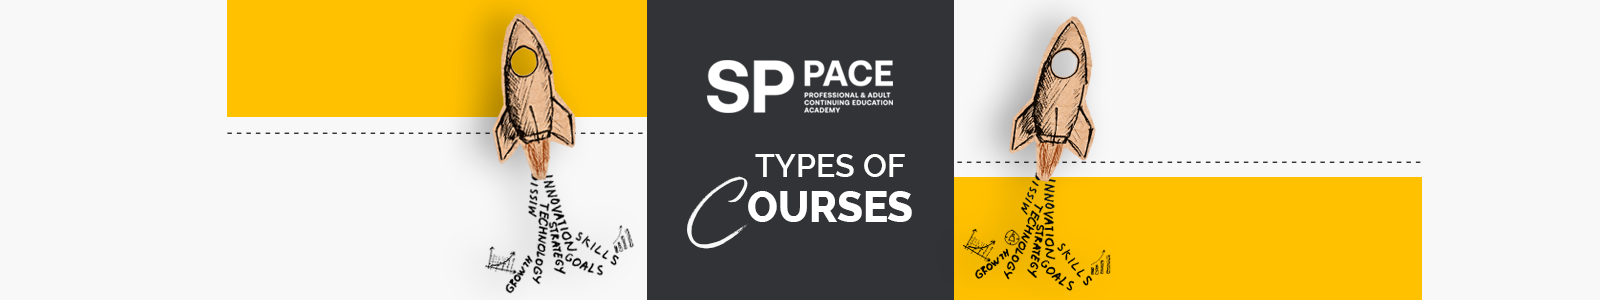 Courses_Course Type